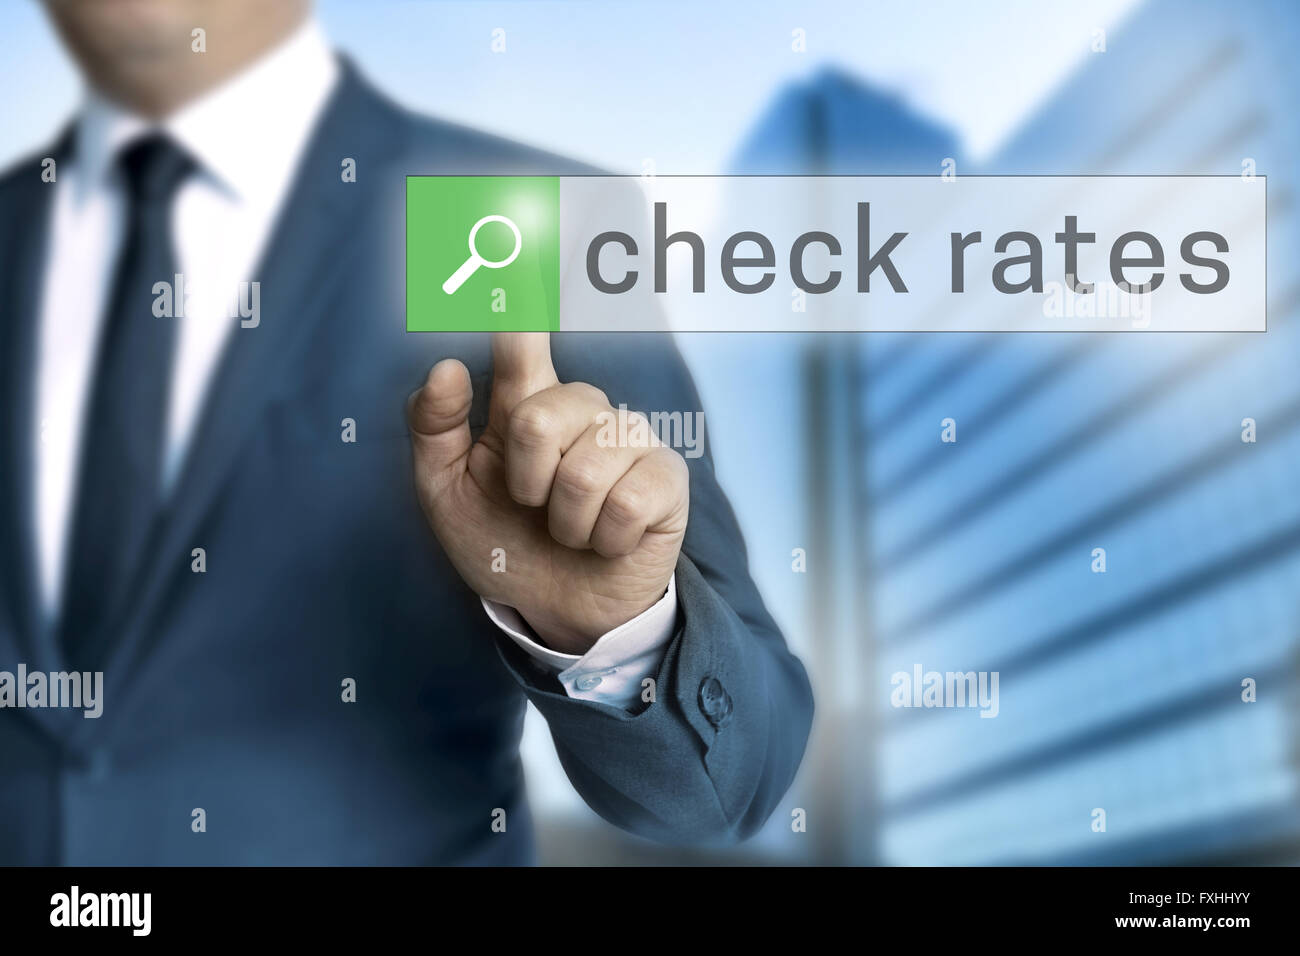 check rates browser is operated by businessman. Stock Photo